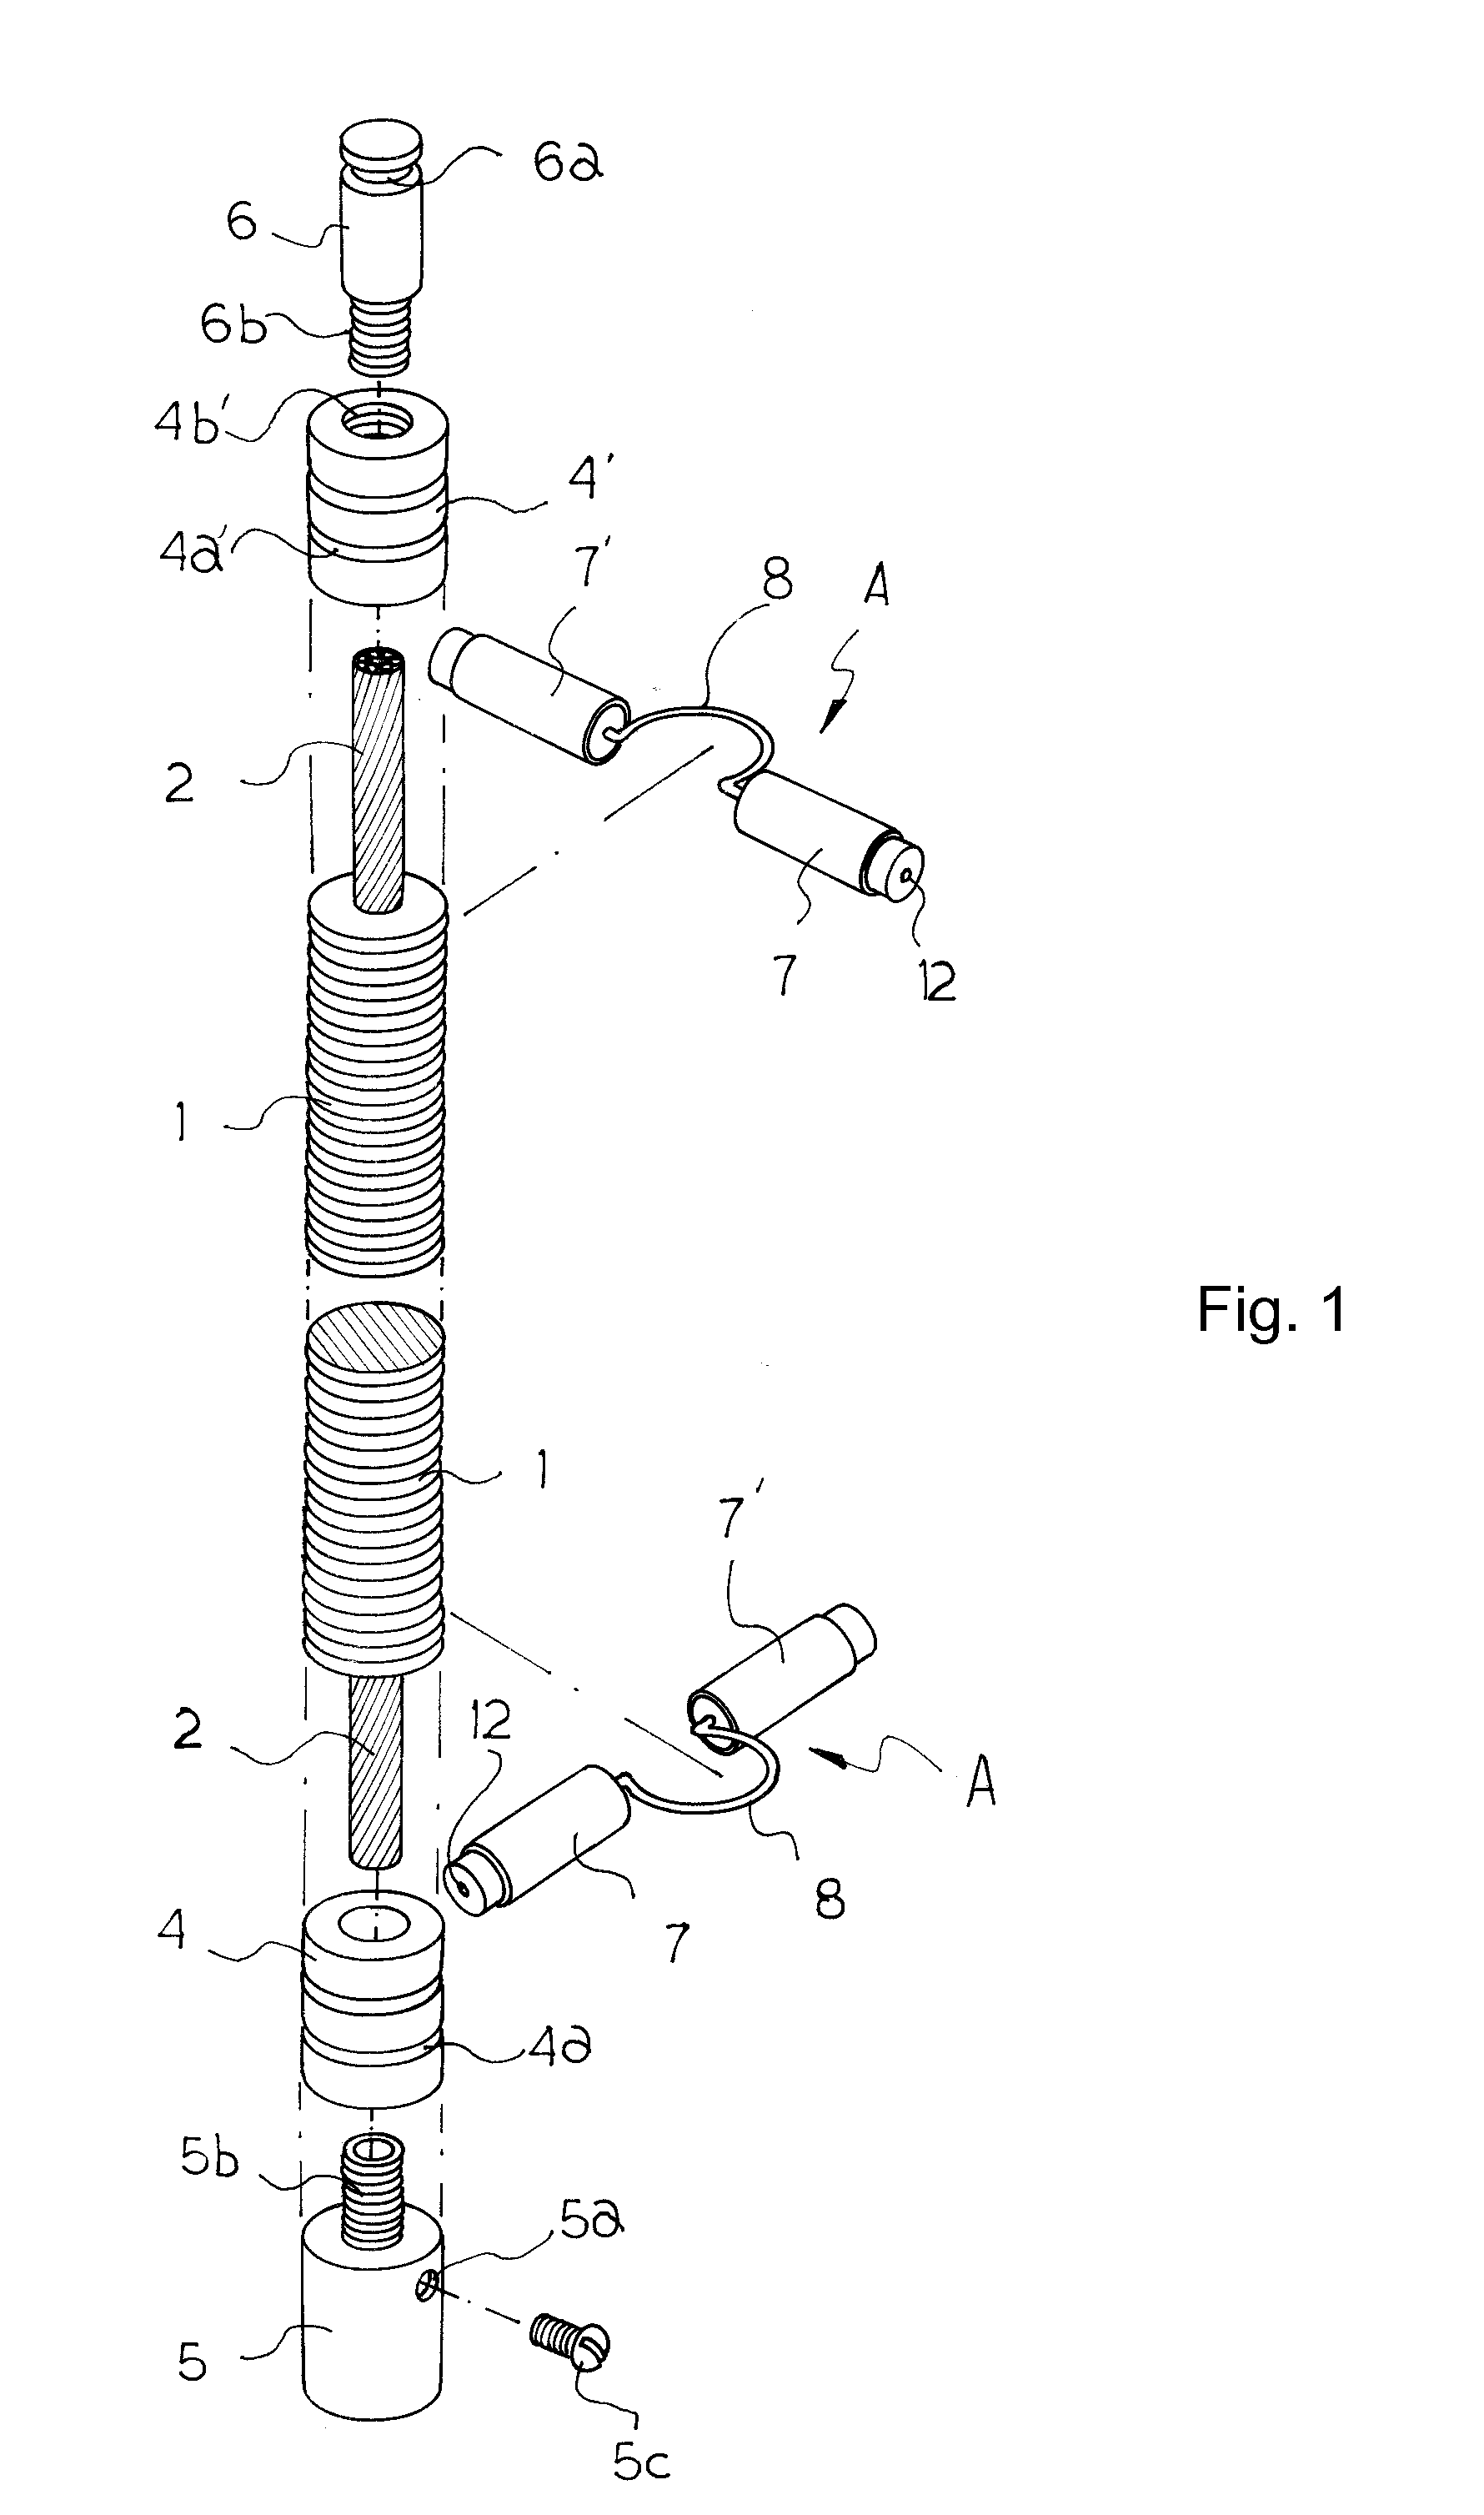 Grounding Wire Structure Having Stainless Steel Covering and Method of Manufacturing the Same